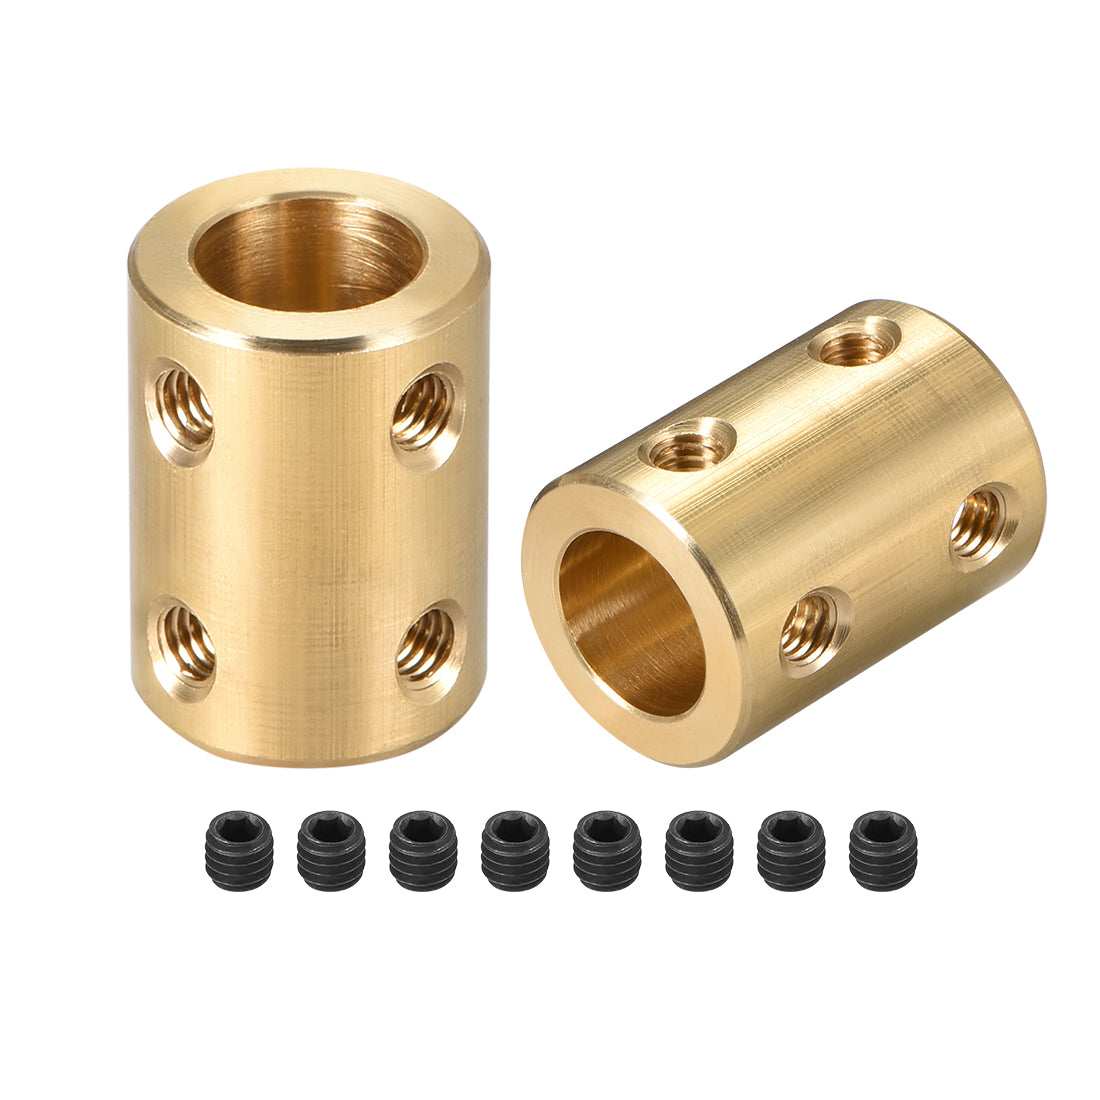 uxcell Uxcell Shaft Coupling 10mm to 10mm Bore L22xD16 Robot Motor Wheel Rigid Coupler Connector Gold Tone 2 Pcs